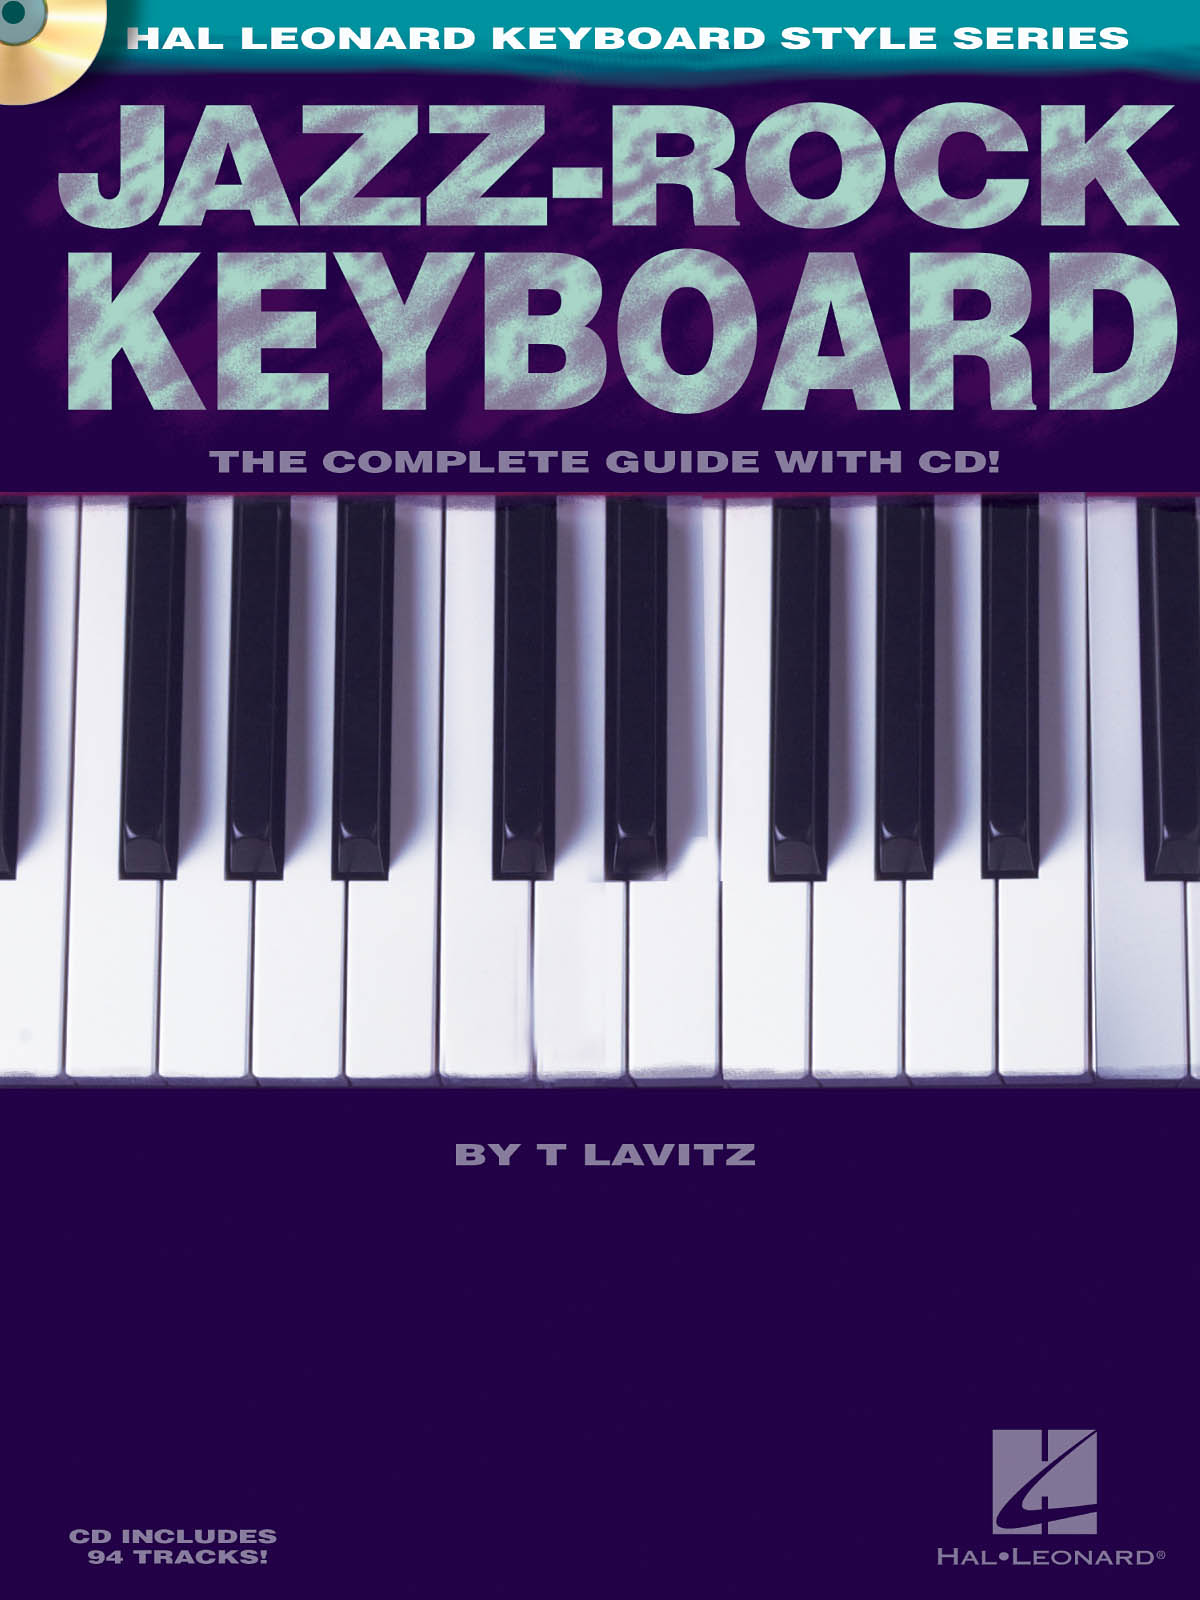 Jazz-Rock Keyboard  - The Complete Guide with CD! - pro keyboard